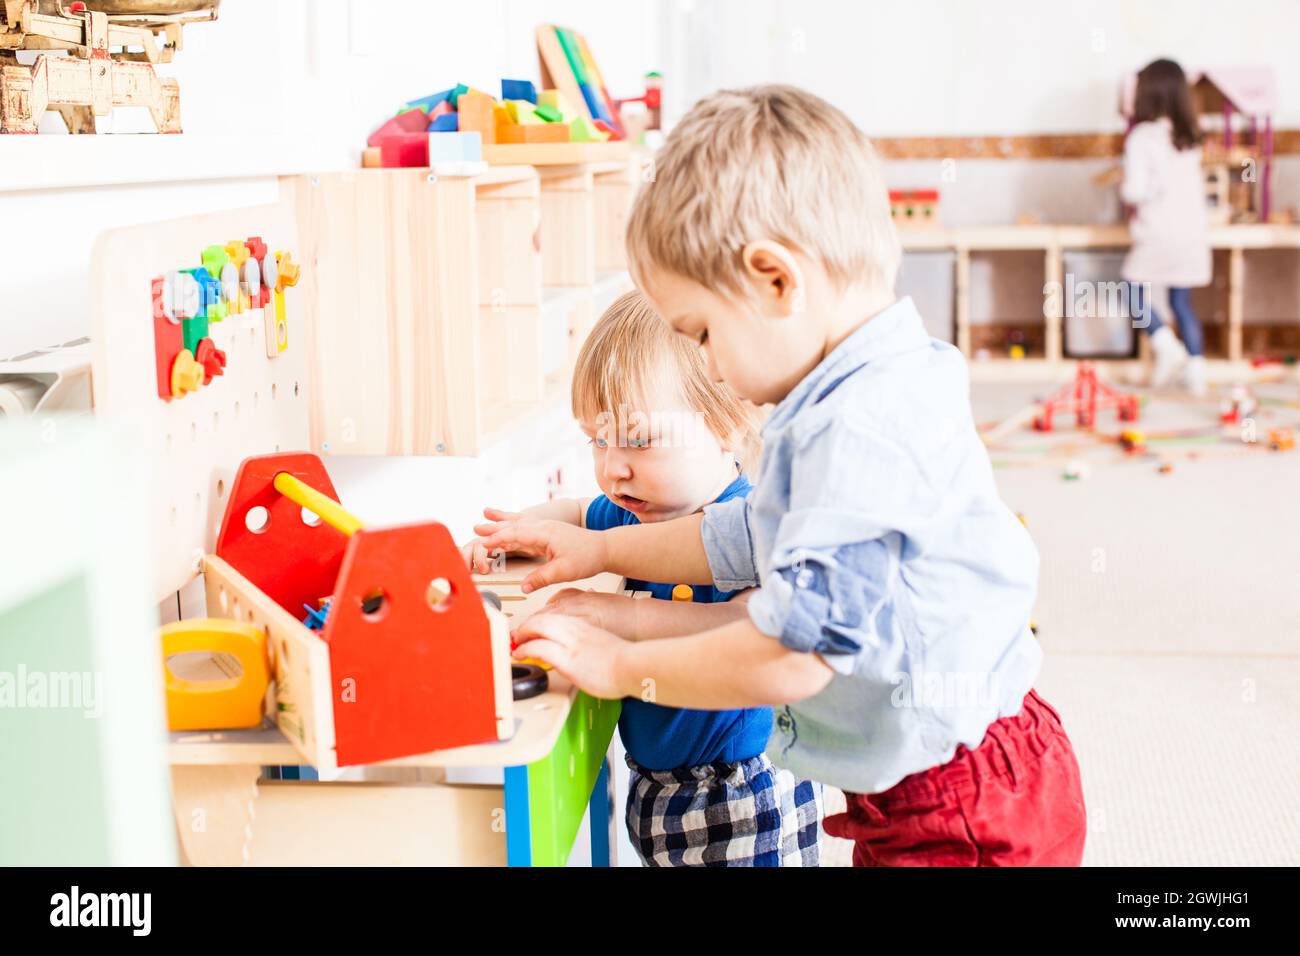 Cute Kids Playing With Toys At School Stock Photo - Alamy